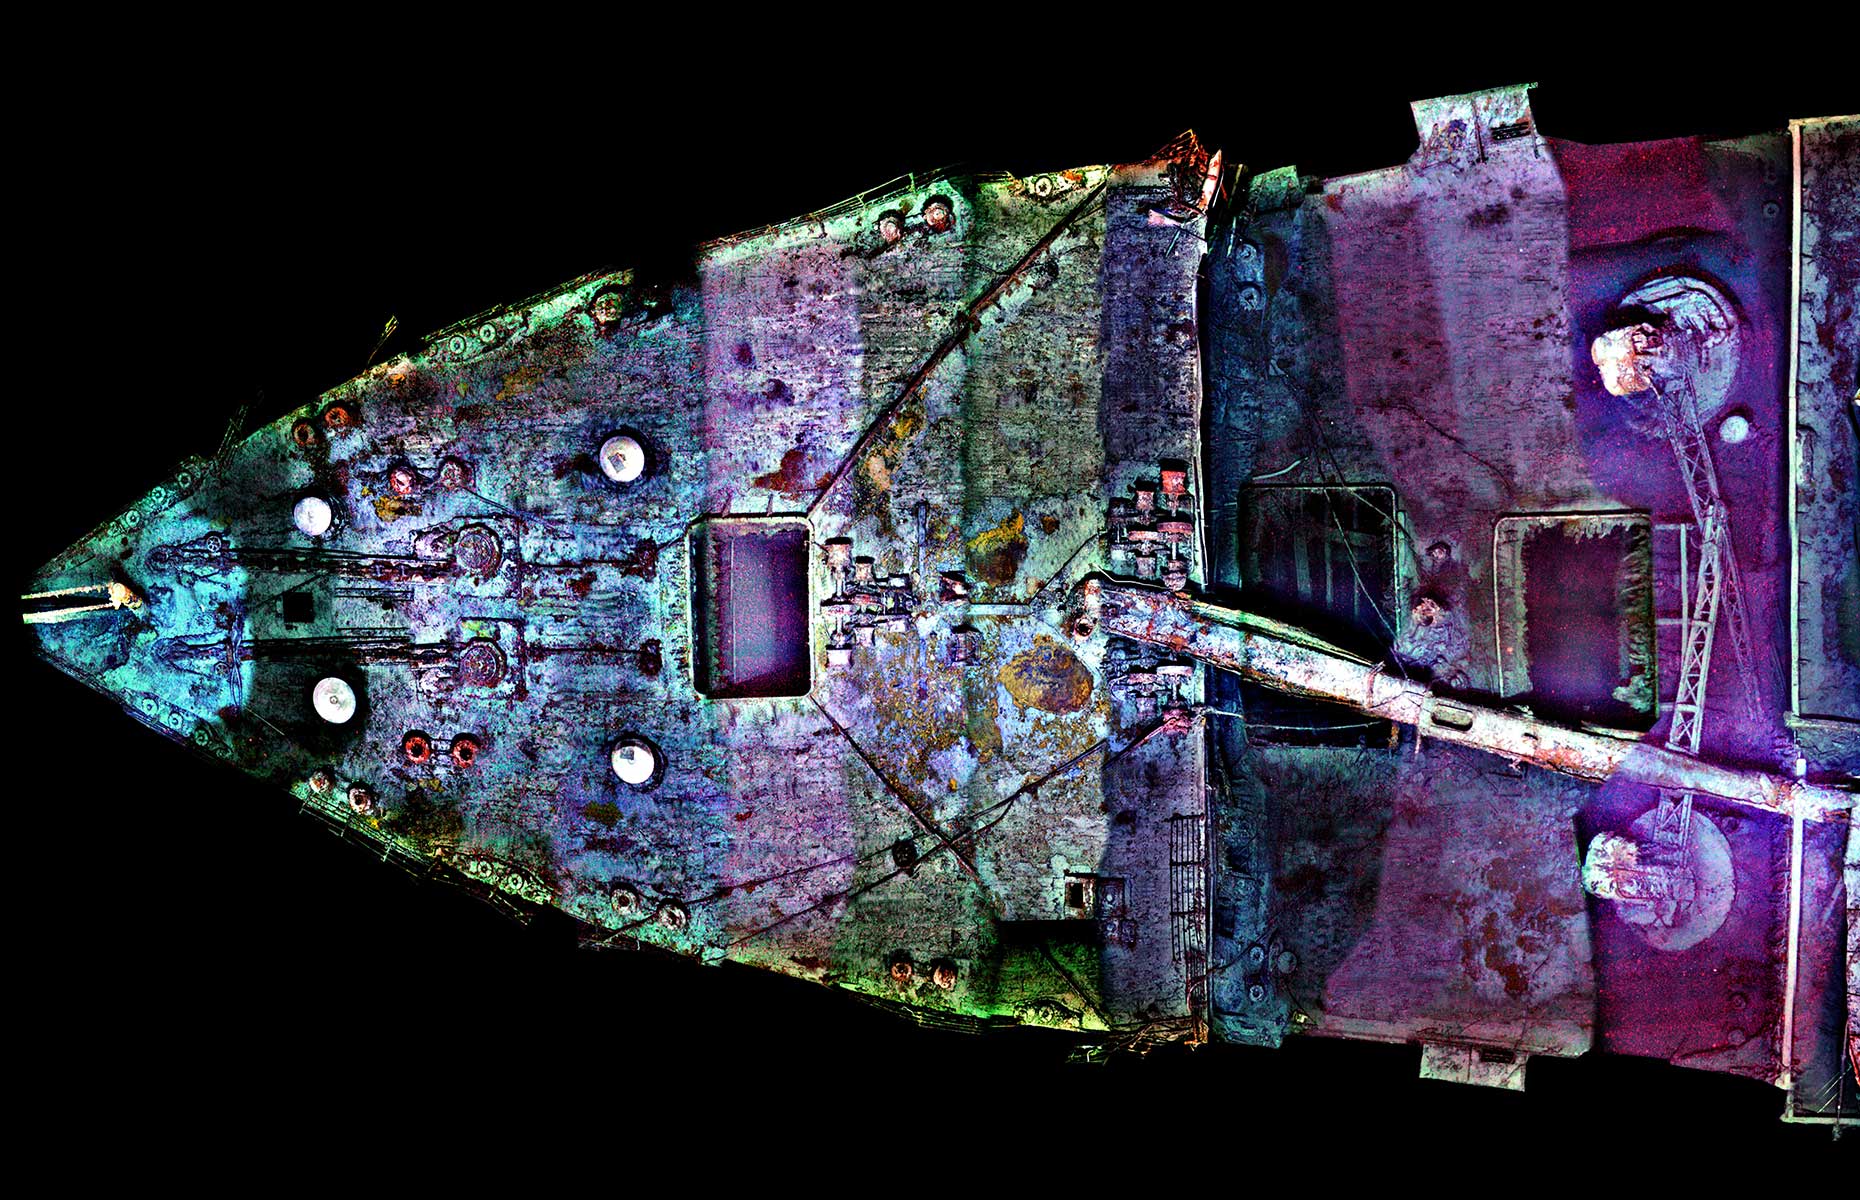 Image of the Titanic from 2004 showing damage to the Crow's Nest (Image: Hanumant Singh, WHOI, and IFE/IAO)